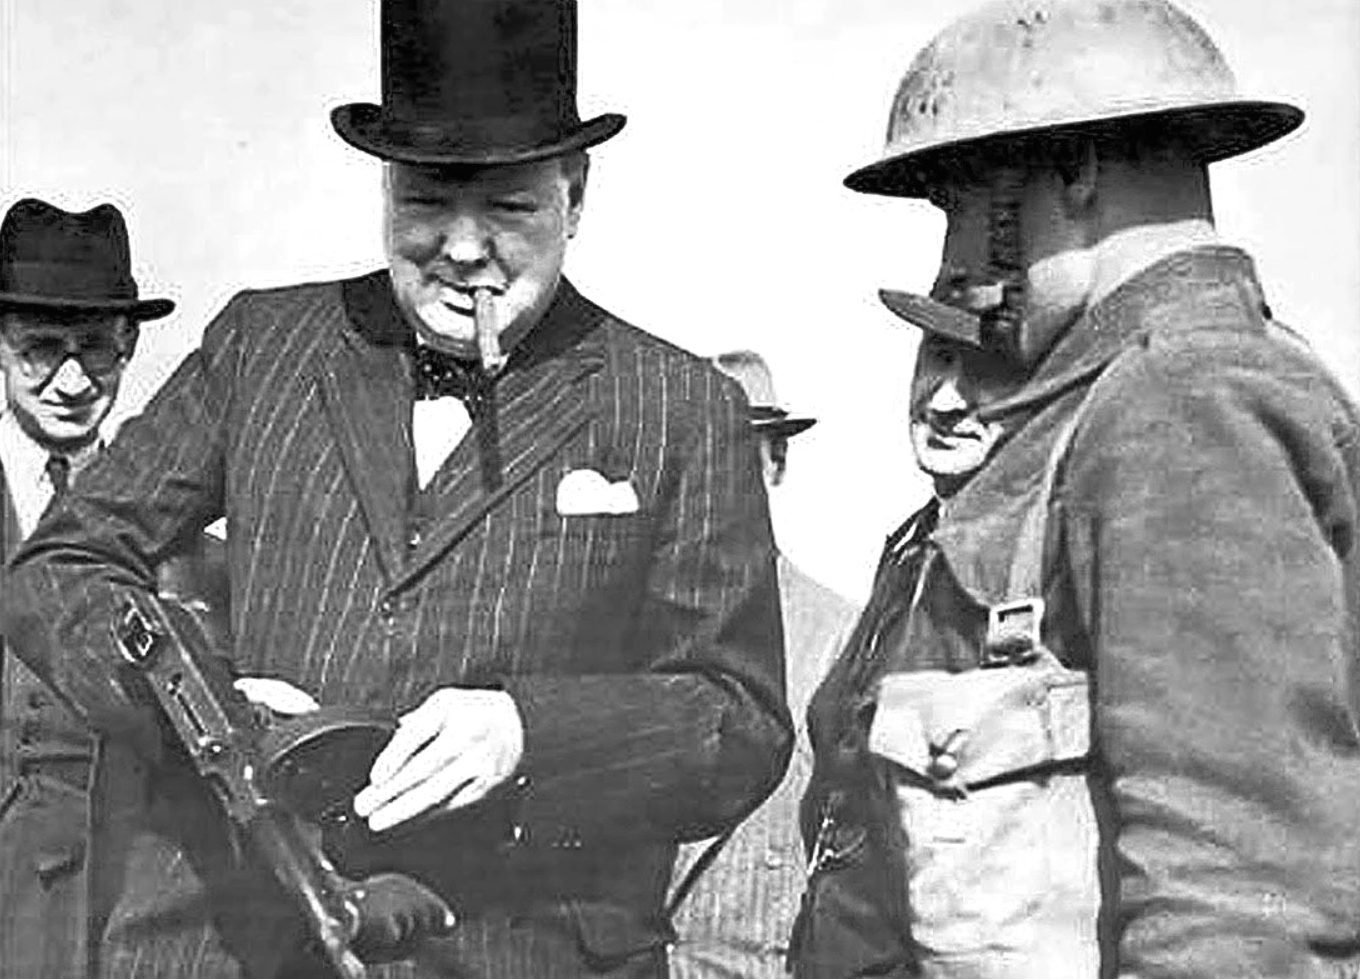 The Nazis used this photo to depict Churchill as a gangster